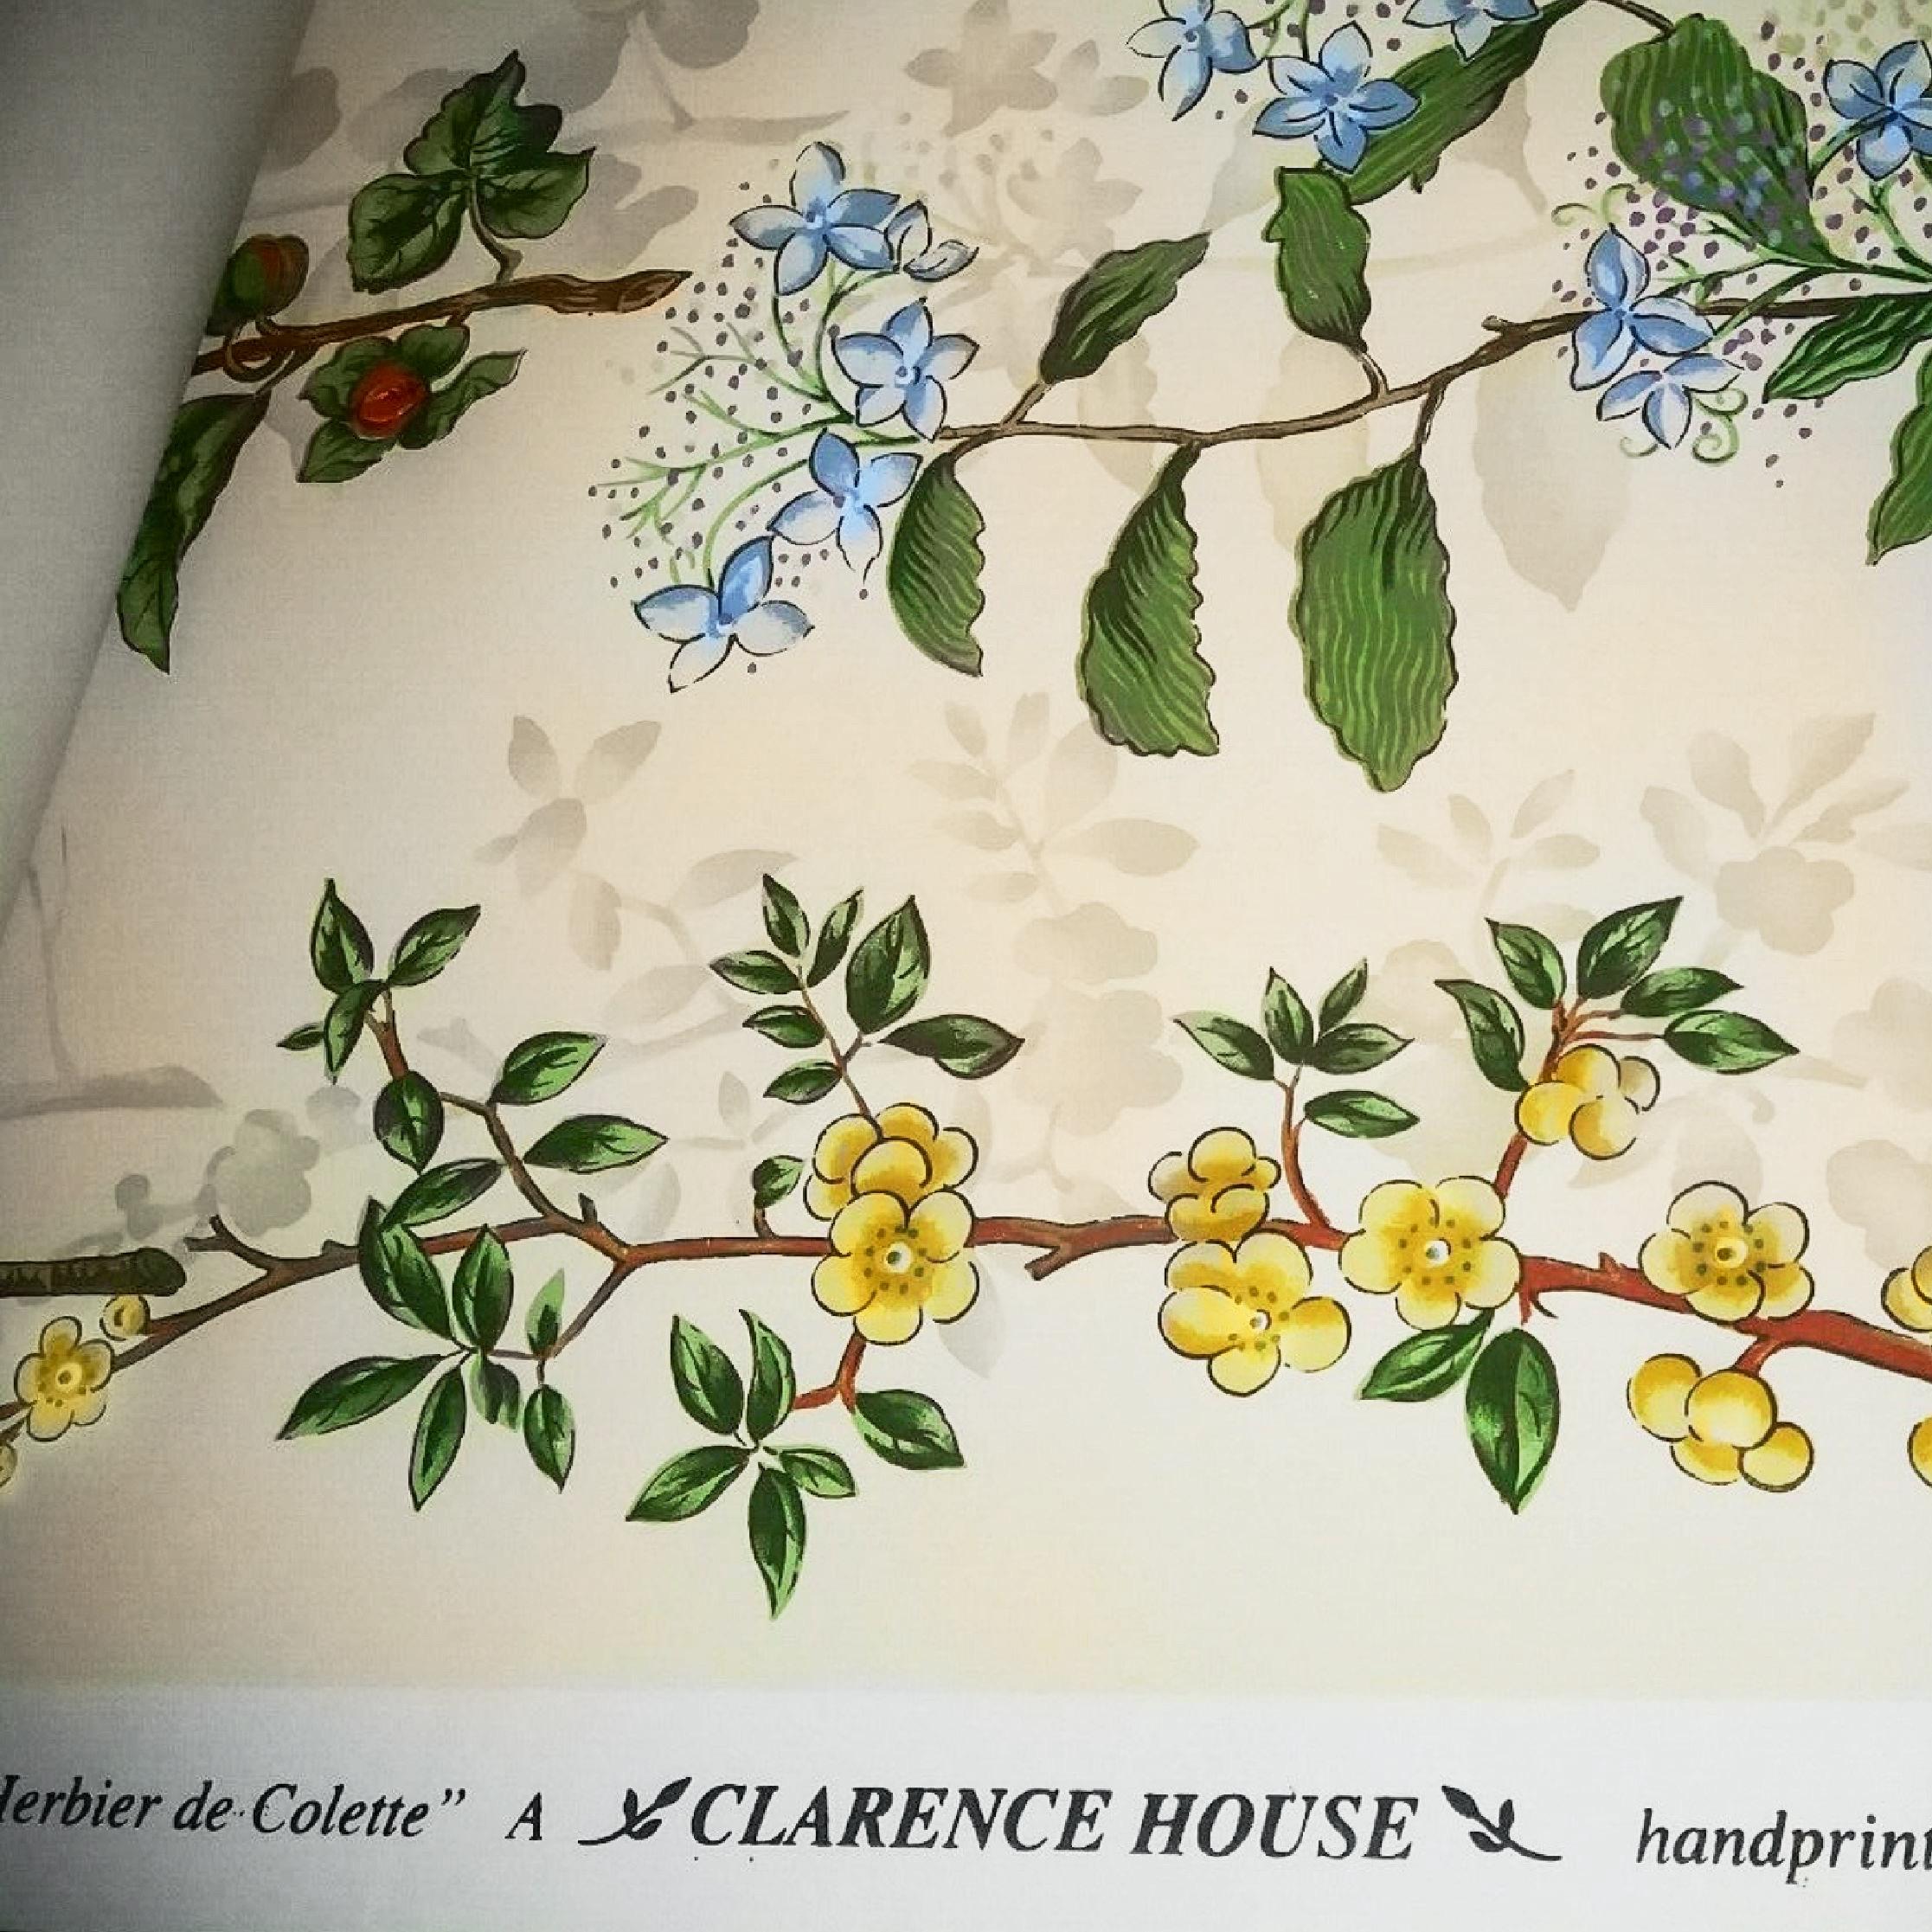 The Herbarium of Colette by Clarence House, vintage handprinted floral wallpaper. Rare limited edition wallpaper, handprinted.
Although little known today, Colette (1873-1954) was the highly regarded French author of some 50 novels, many of them